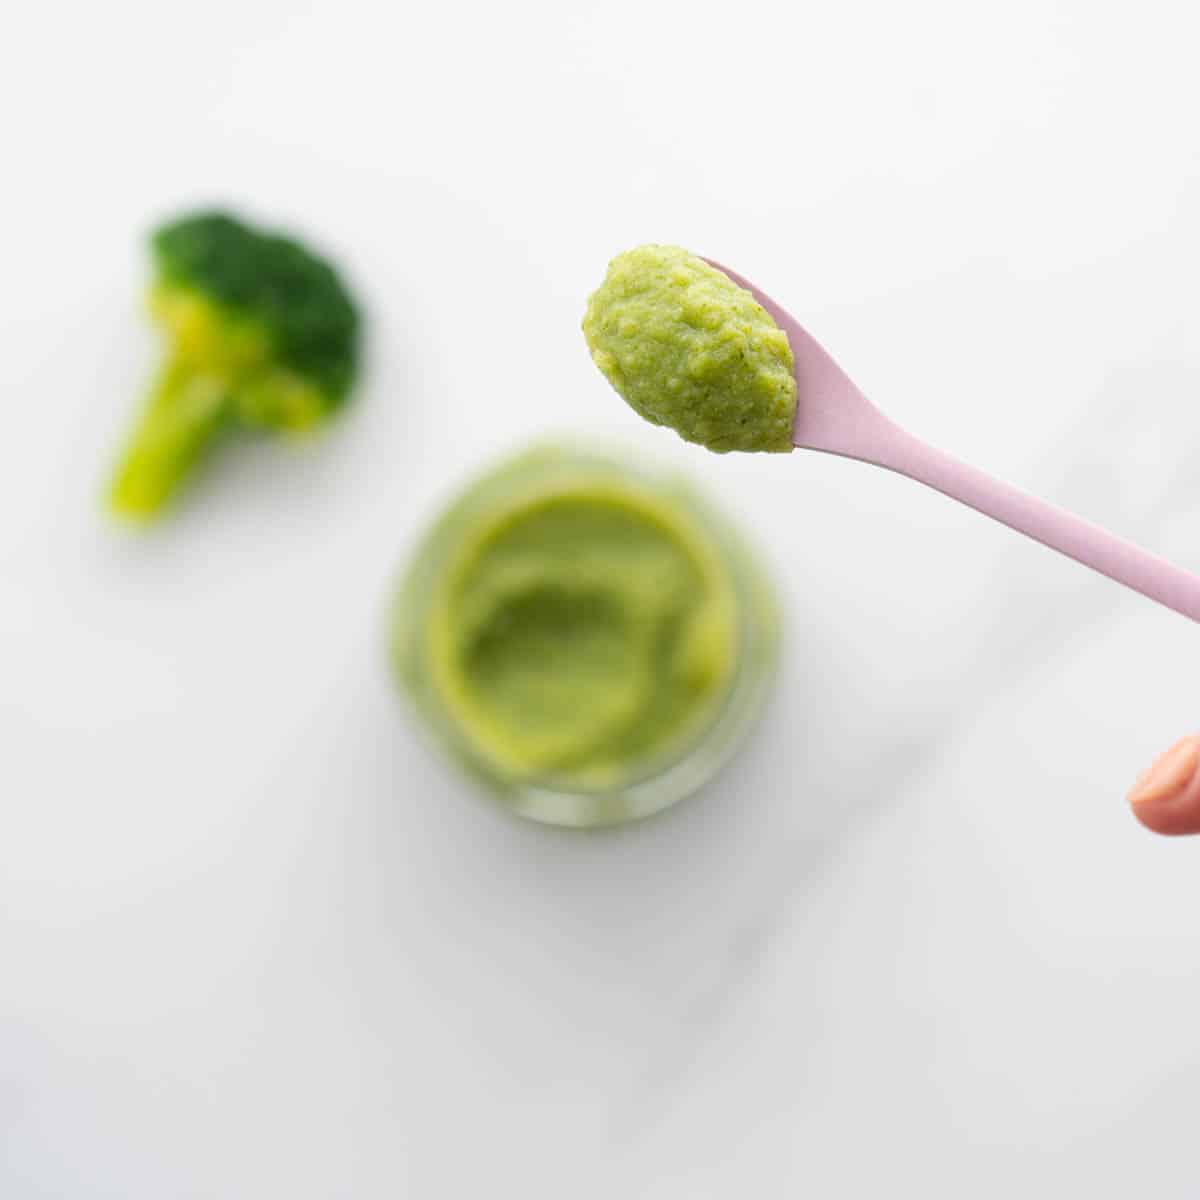 A spoonful of broccoli puree being held above a glass jar of puree.